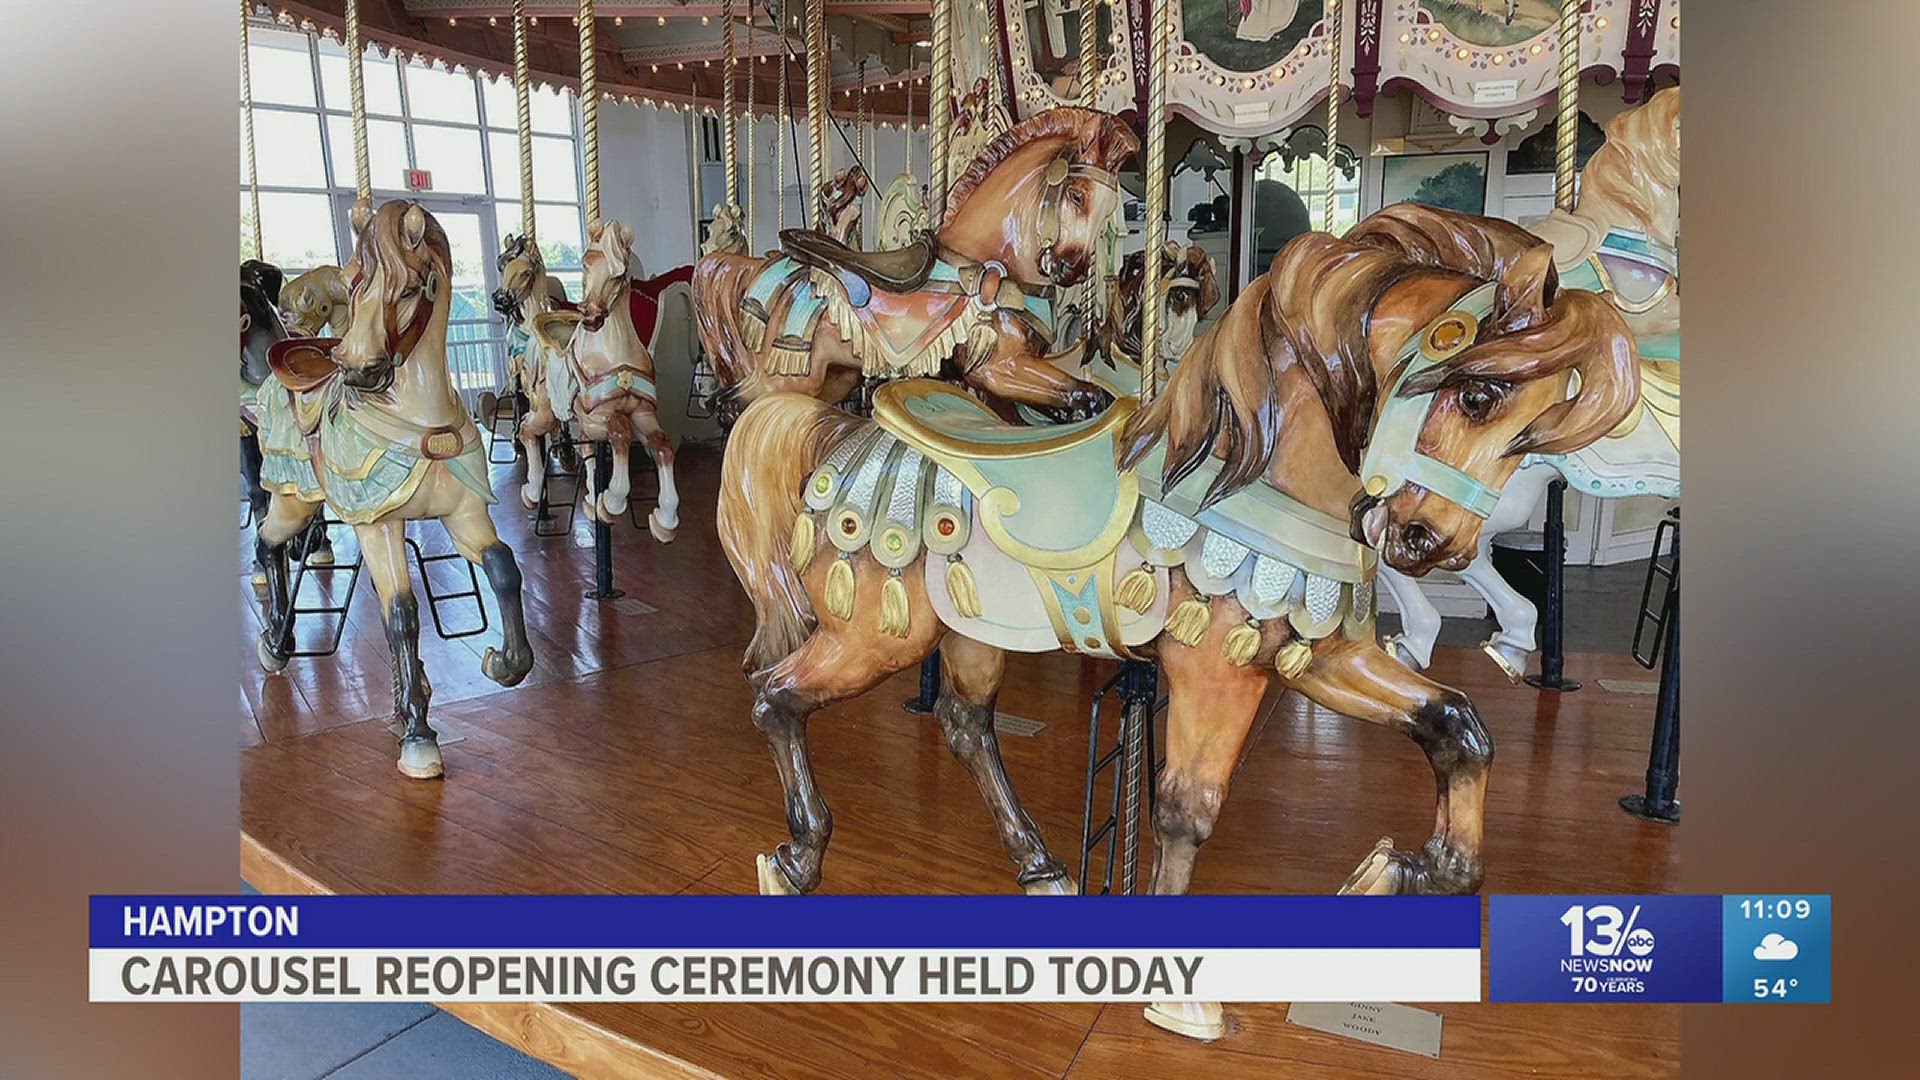 The carousel is open after a closure for repairs.